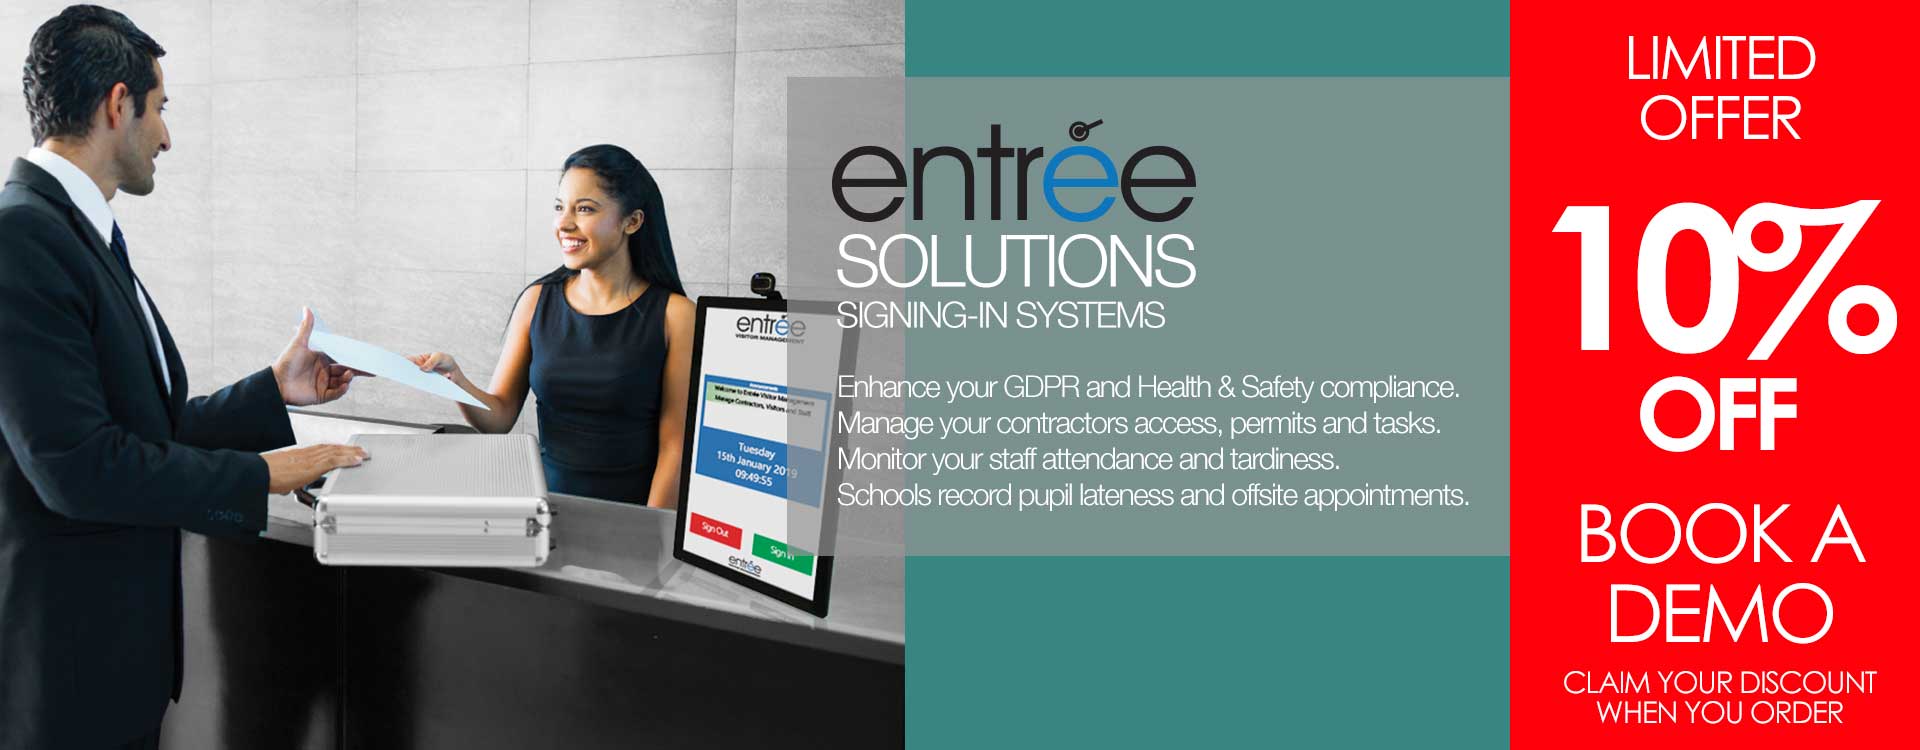 Entrée solutions signing in systems. Enhance your GDPR and Health and Safety compliance. Manage your contractors access. permits and tasks. Monitor your staff attendance and tardiness. Schools record pupil lateness and offsite appointments. Get a 10% discount when your order.